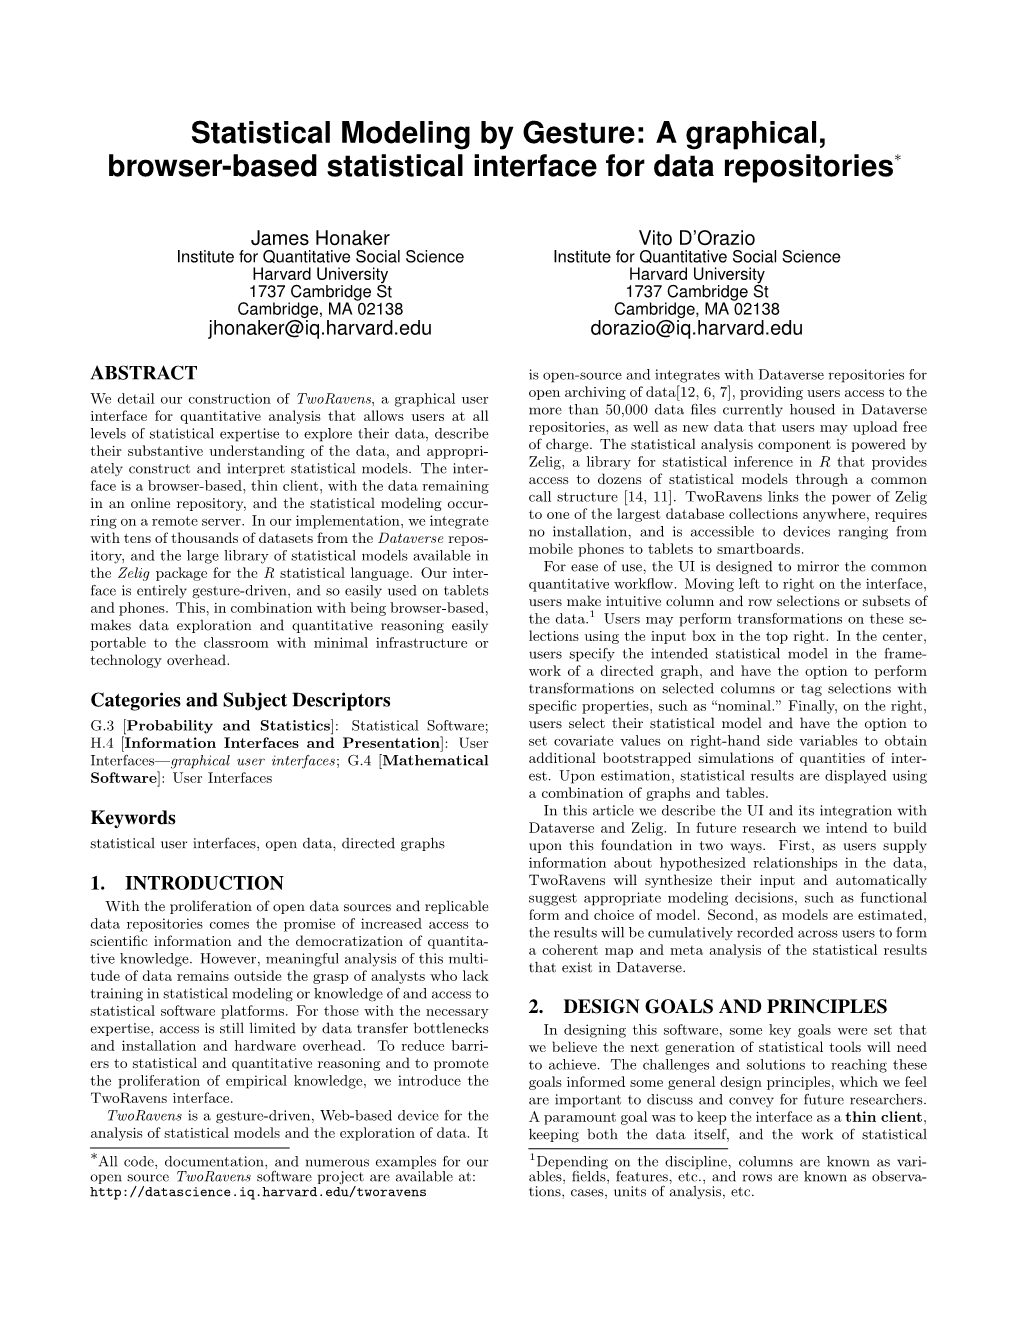 Statistical Modeling by Gesture: a Graphical, Browser-Based Statistical Interface for Data Repositories∗